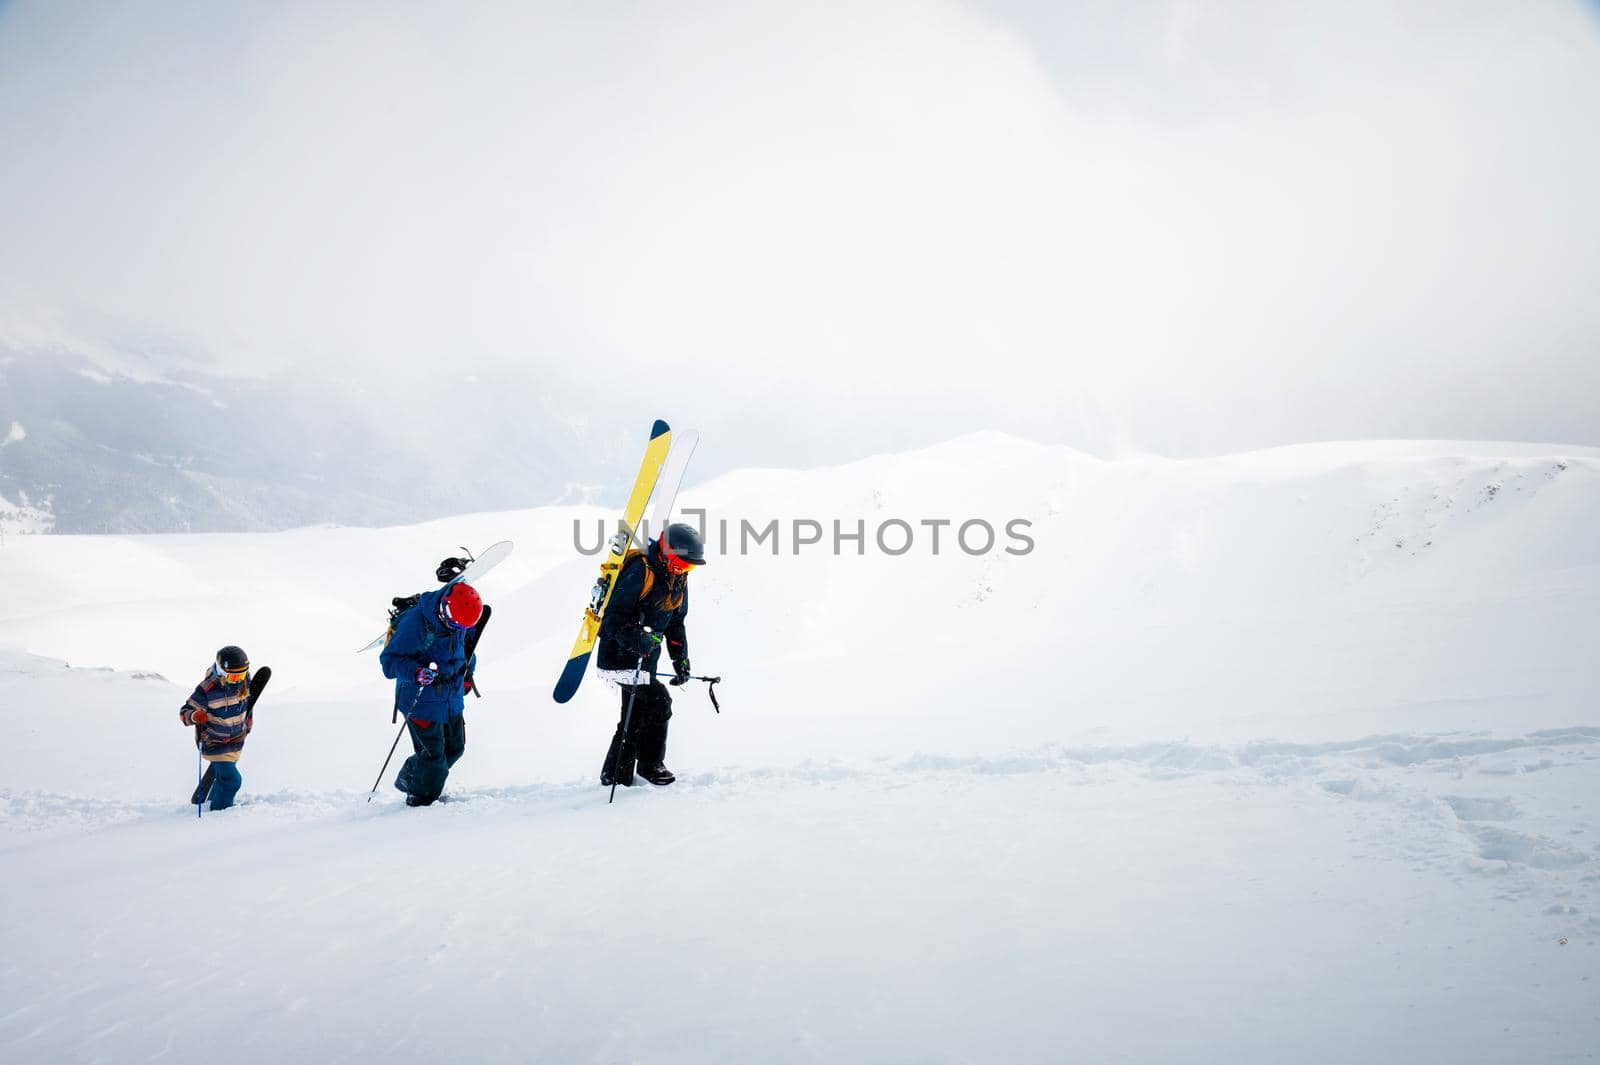 Three friends snowboarders skiers go uphill with a snowboard and skis in their hands for backcountry or freeride against the backdrop of the snow-capped mountains of the Alpine resort. Ski tour concept with group of peoples